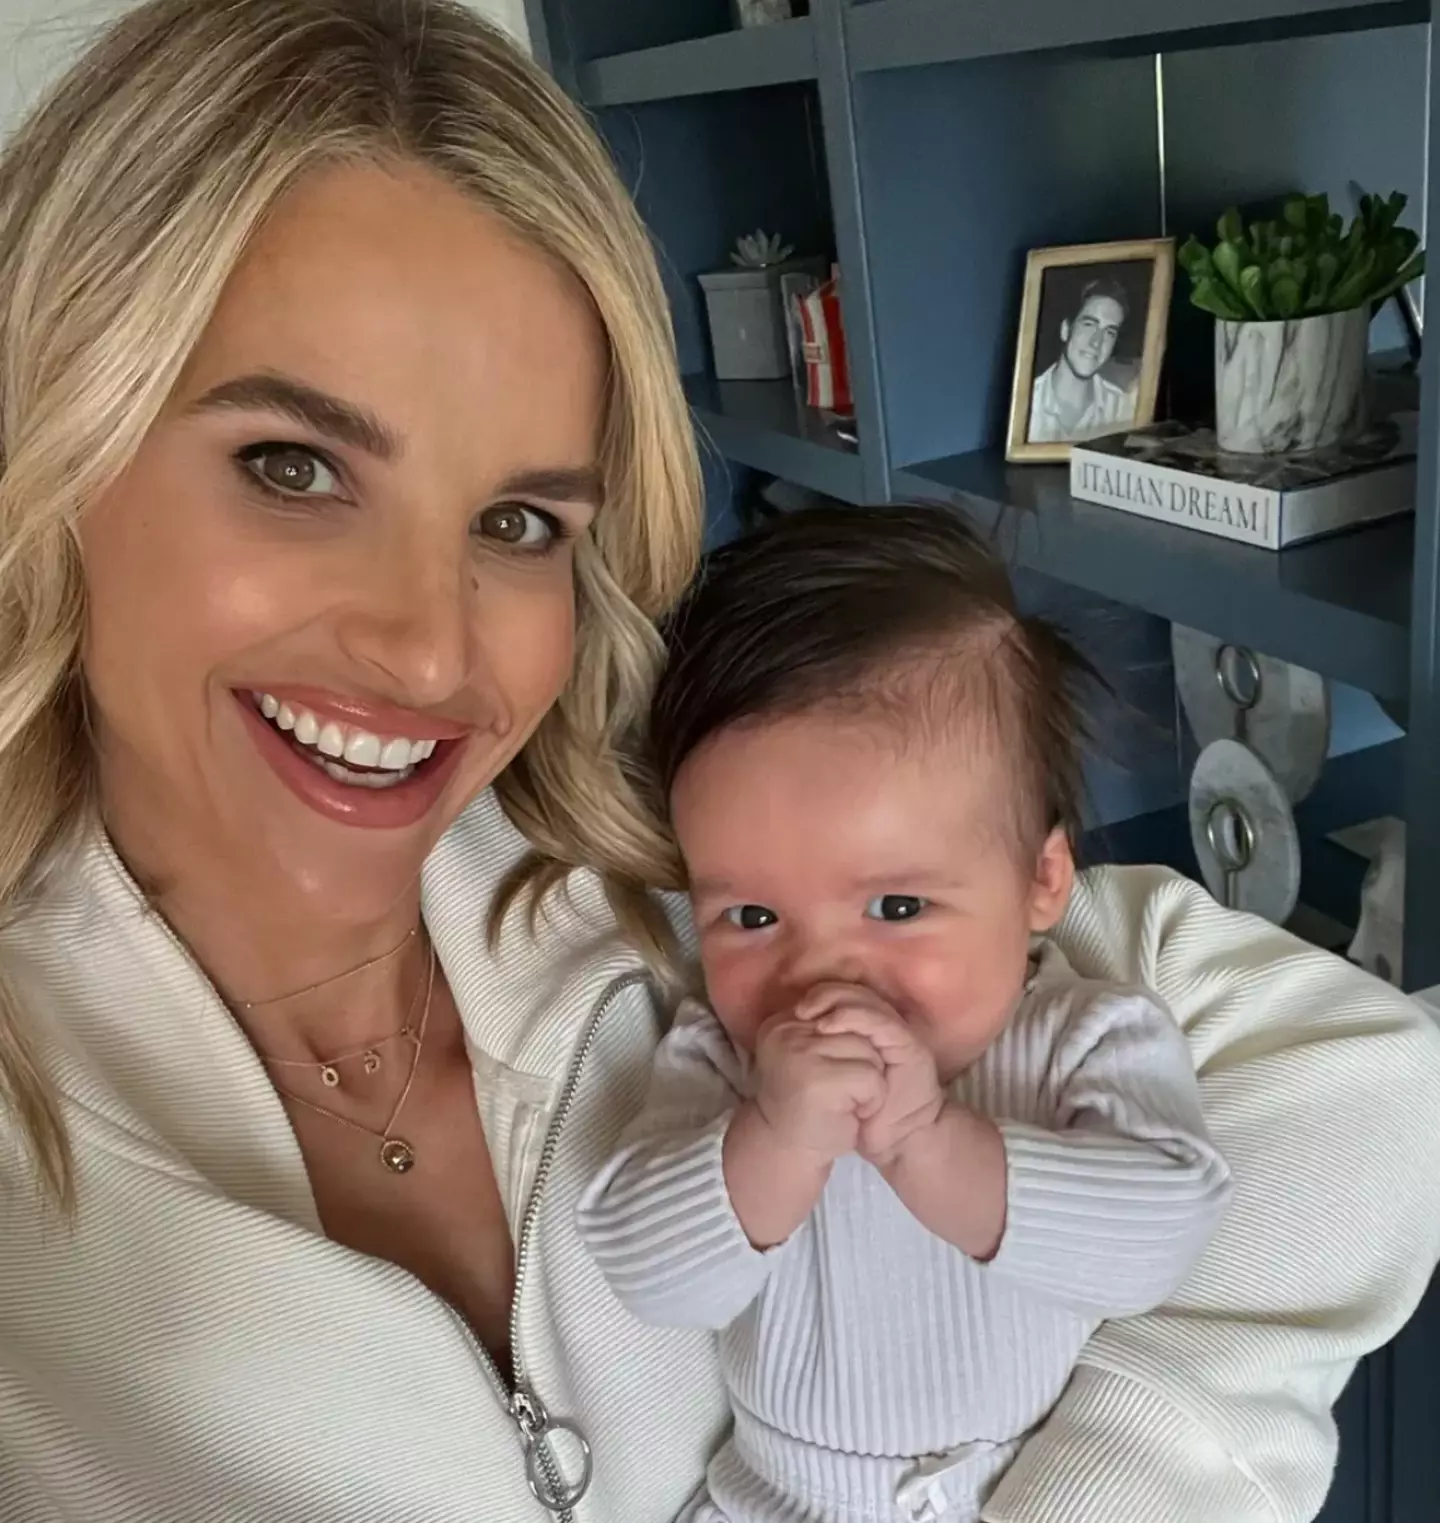 Vogue Williams has hit back at a troll on social media who called her baby son Otto 'ugly'.